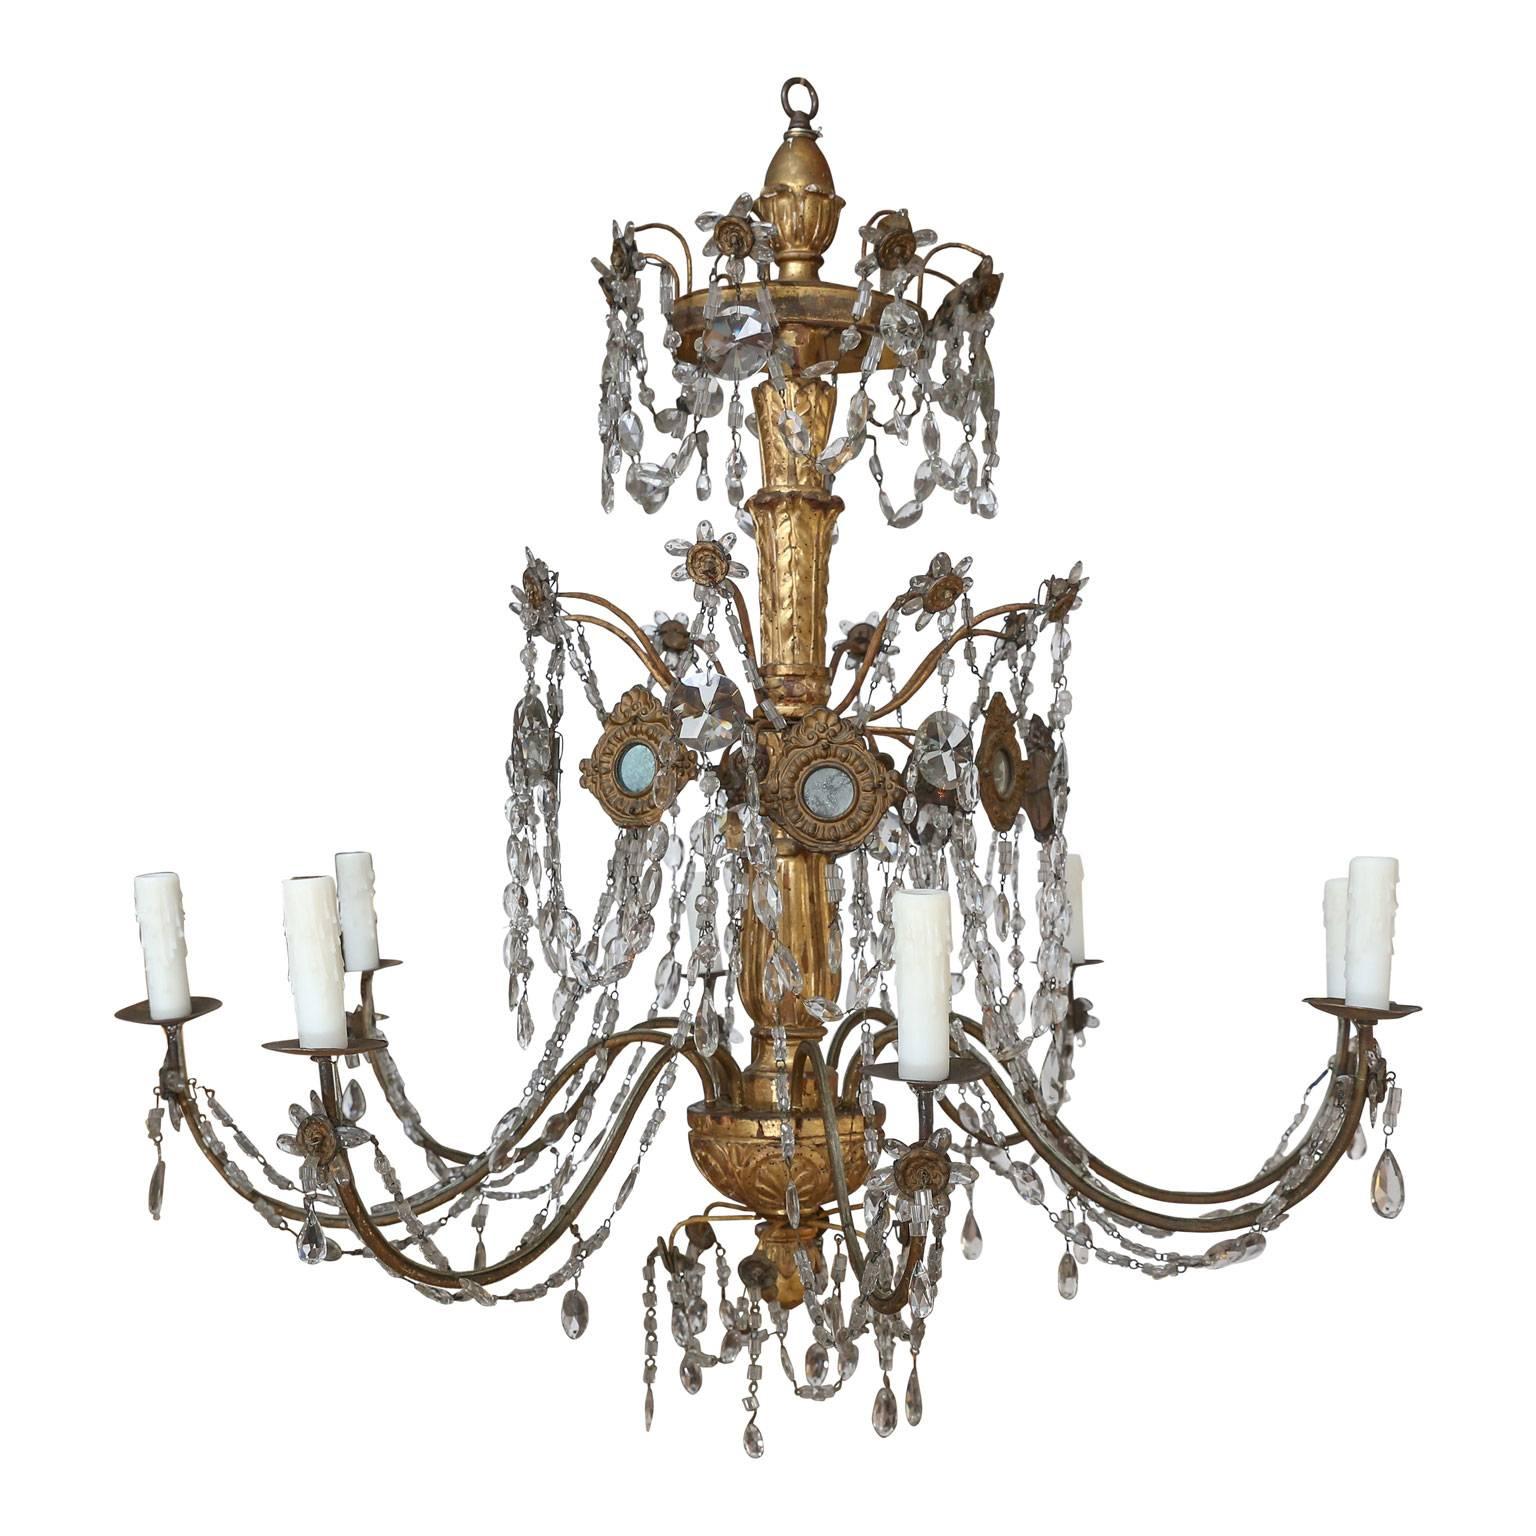 Pair of 18th century Genoese chandeliers with original arms, mirrored bronze reflectors and decorated with most of their original crystal and gilded finish (with some loss of gilding and restoration). A beautiful pair in this shape and condition is